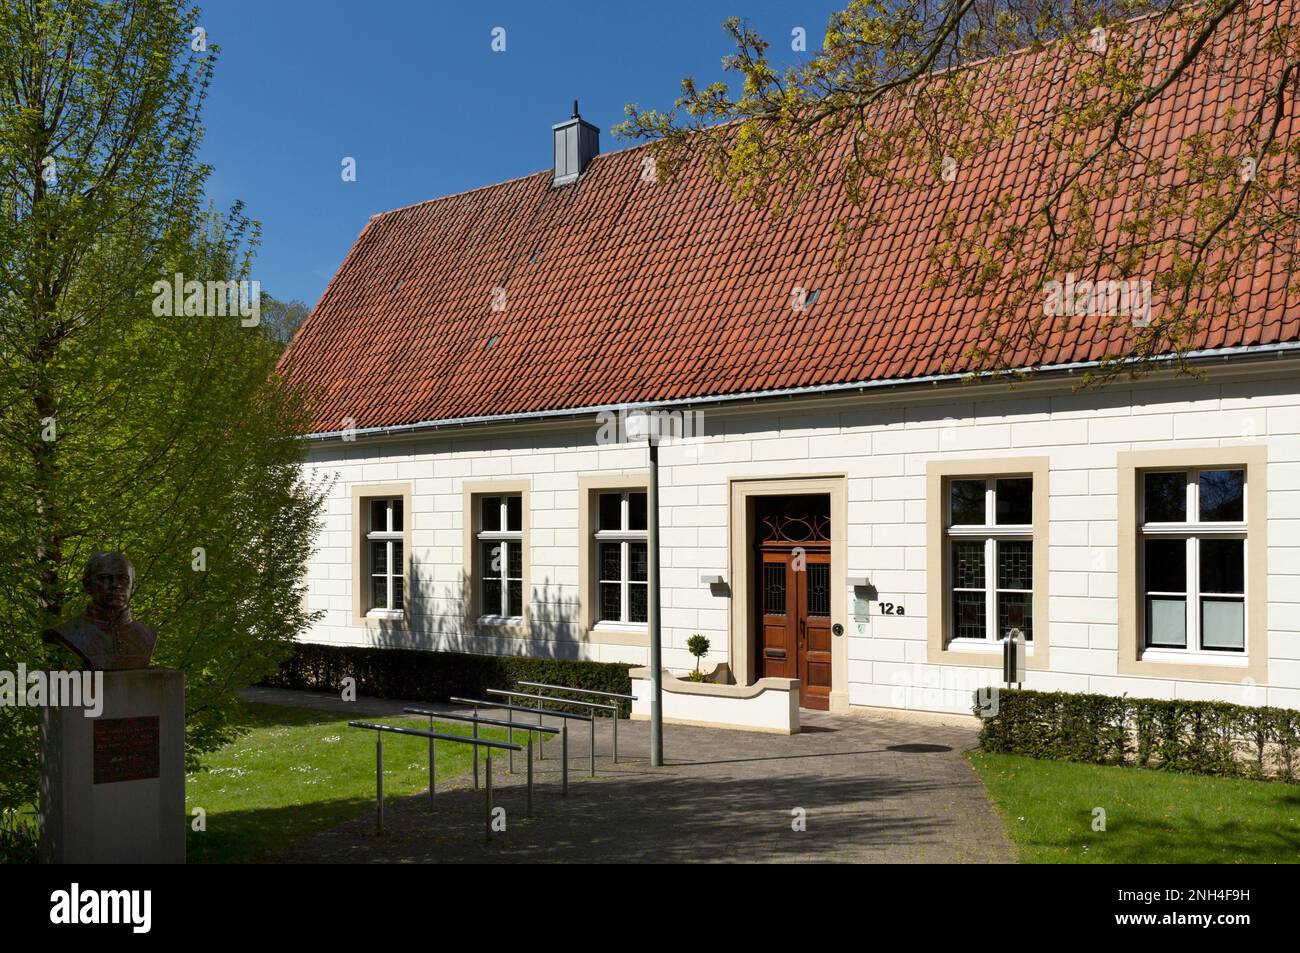 Former rectory of the Catholic church St. Pankratius, today House of Encounter, Gescher, Muensterland, North Rhine-Westphalia, Germany Stock Photo